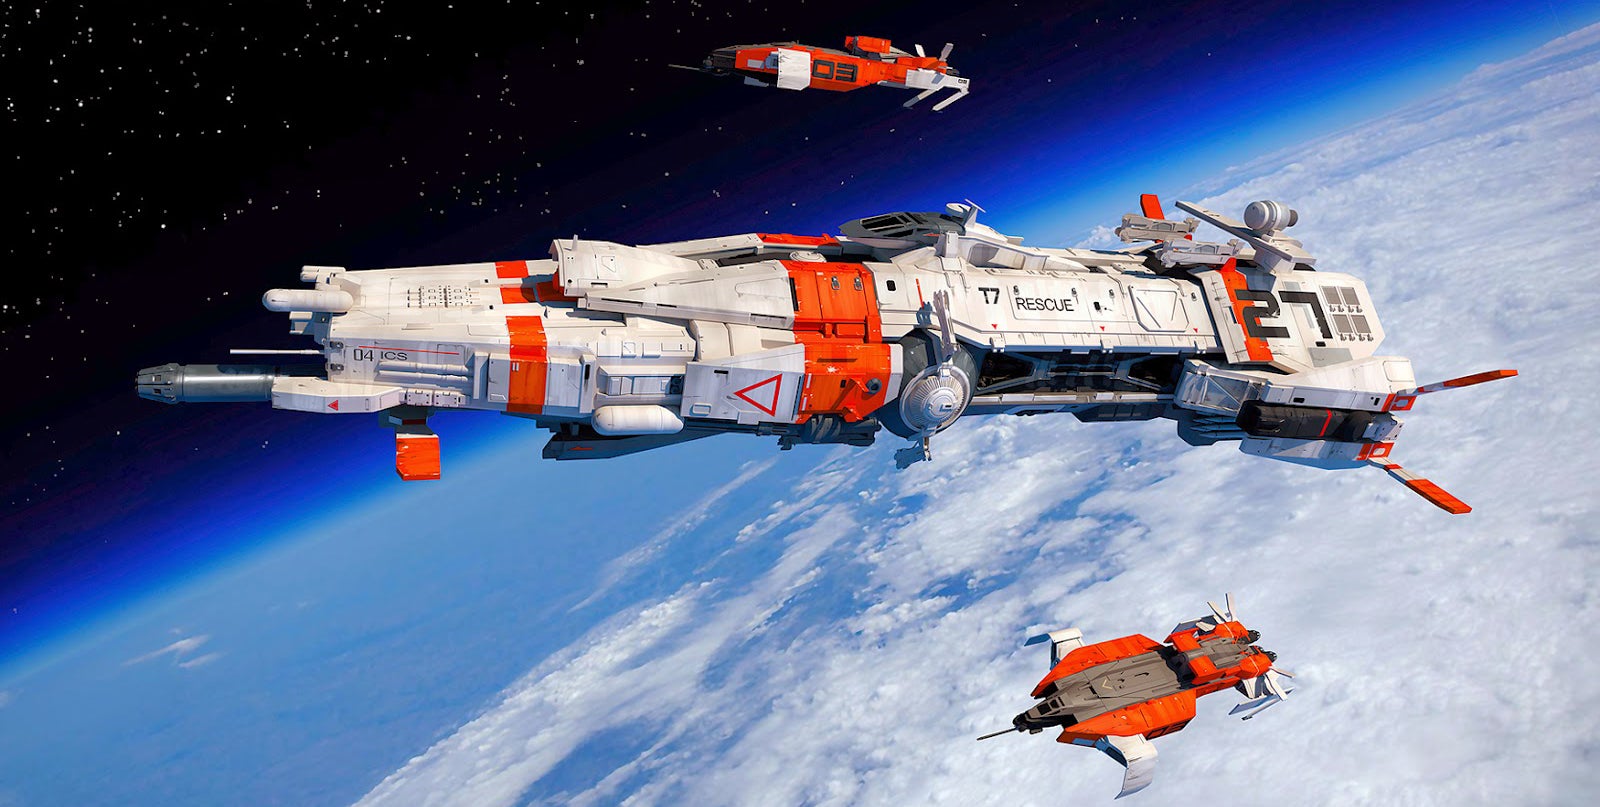 I want to work and live in these awesome spaceships